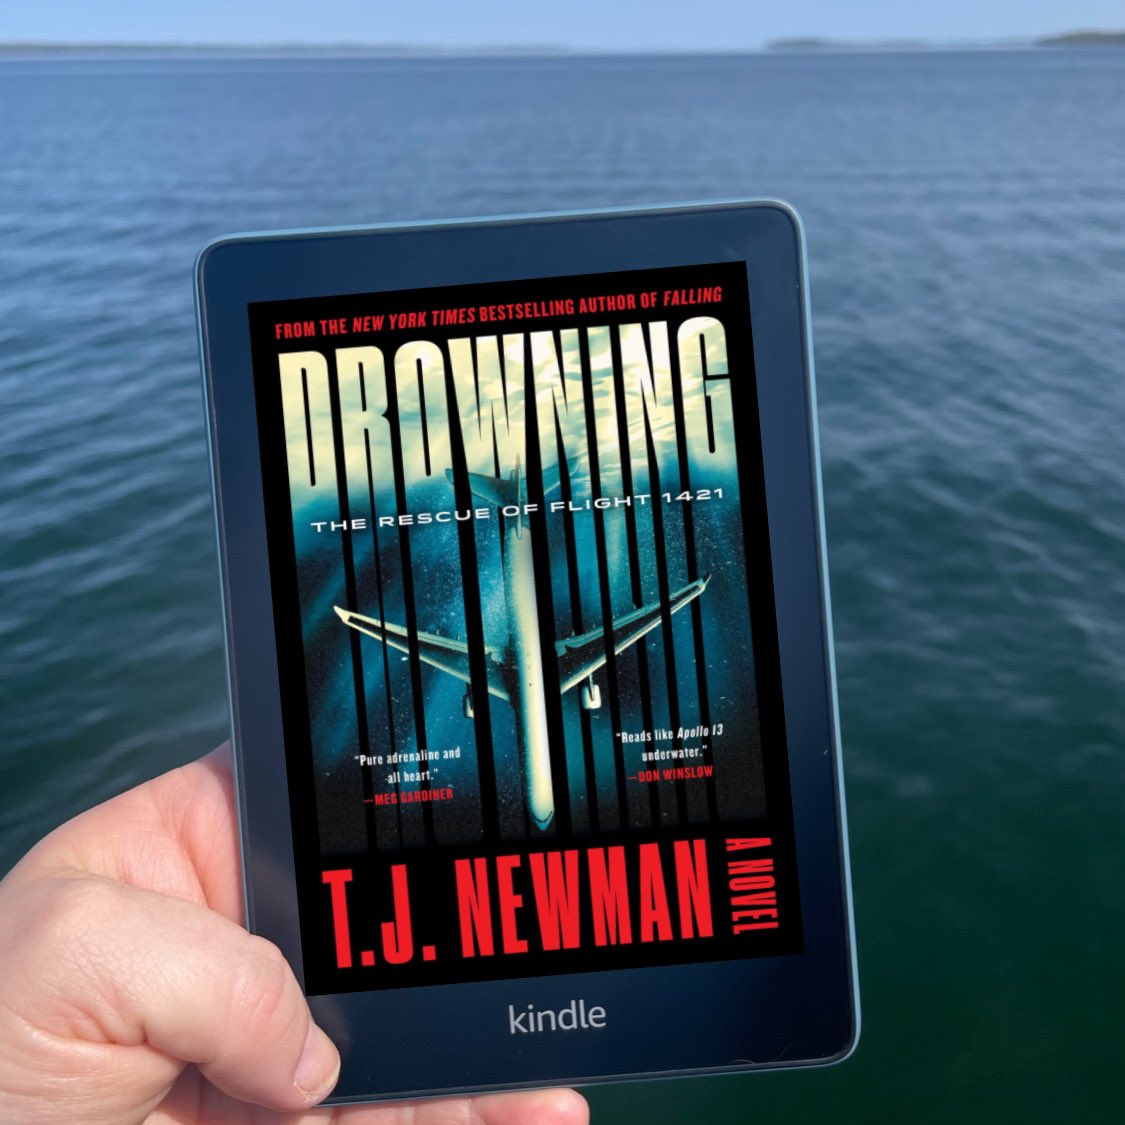 Happy Publication Day @T_J_Newman 🎉 Fast paced, all the emotions and you’ll find yourself holding your breathe more than once. #drowningbook #bookclubfavorites #actionthriller #summerreadinglist @AvidReaderPress @librofm